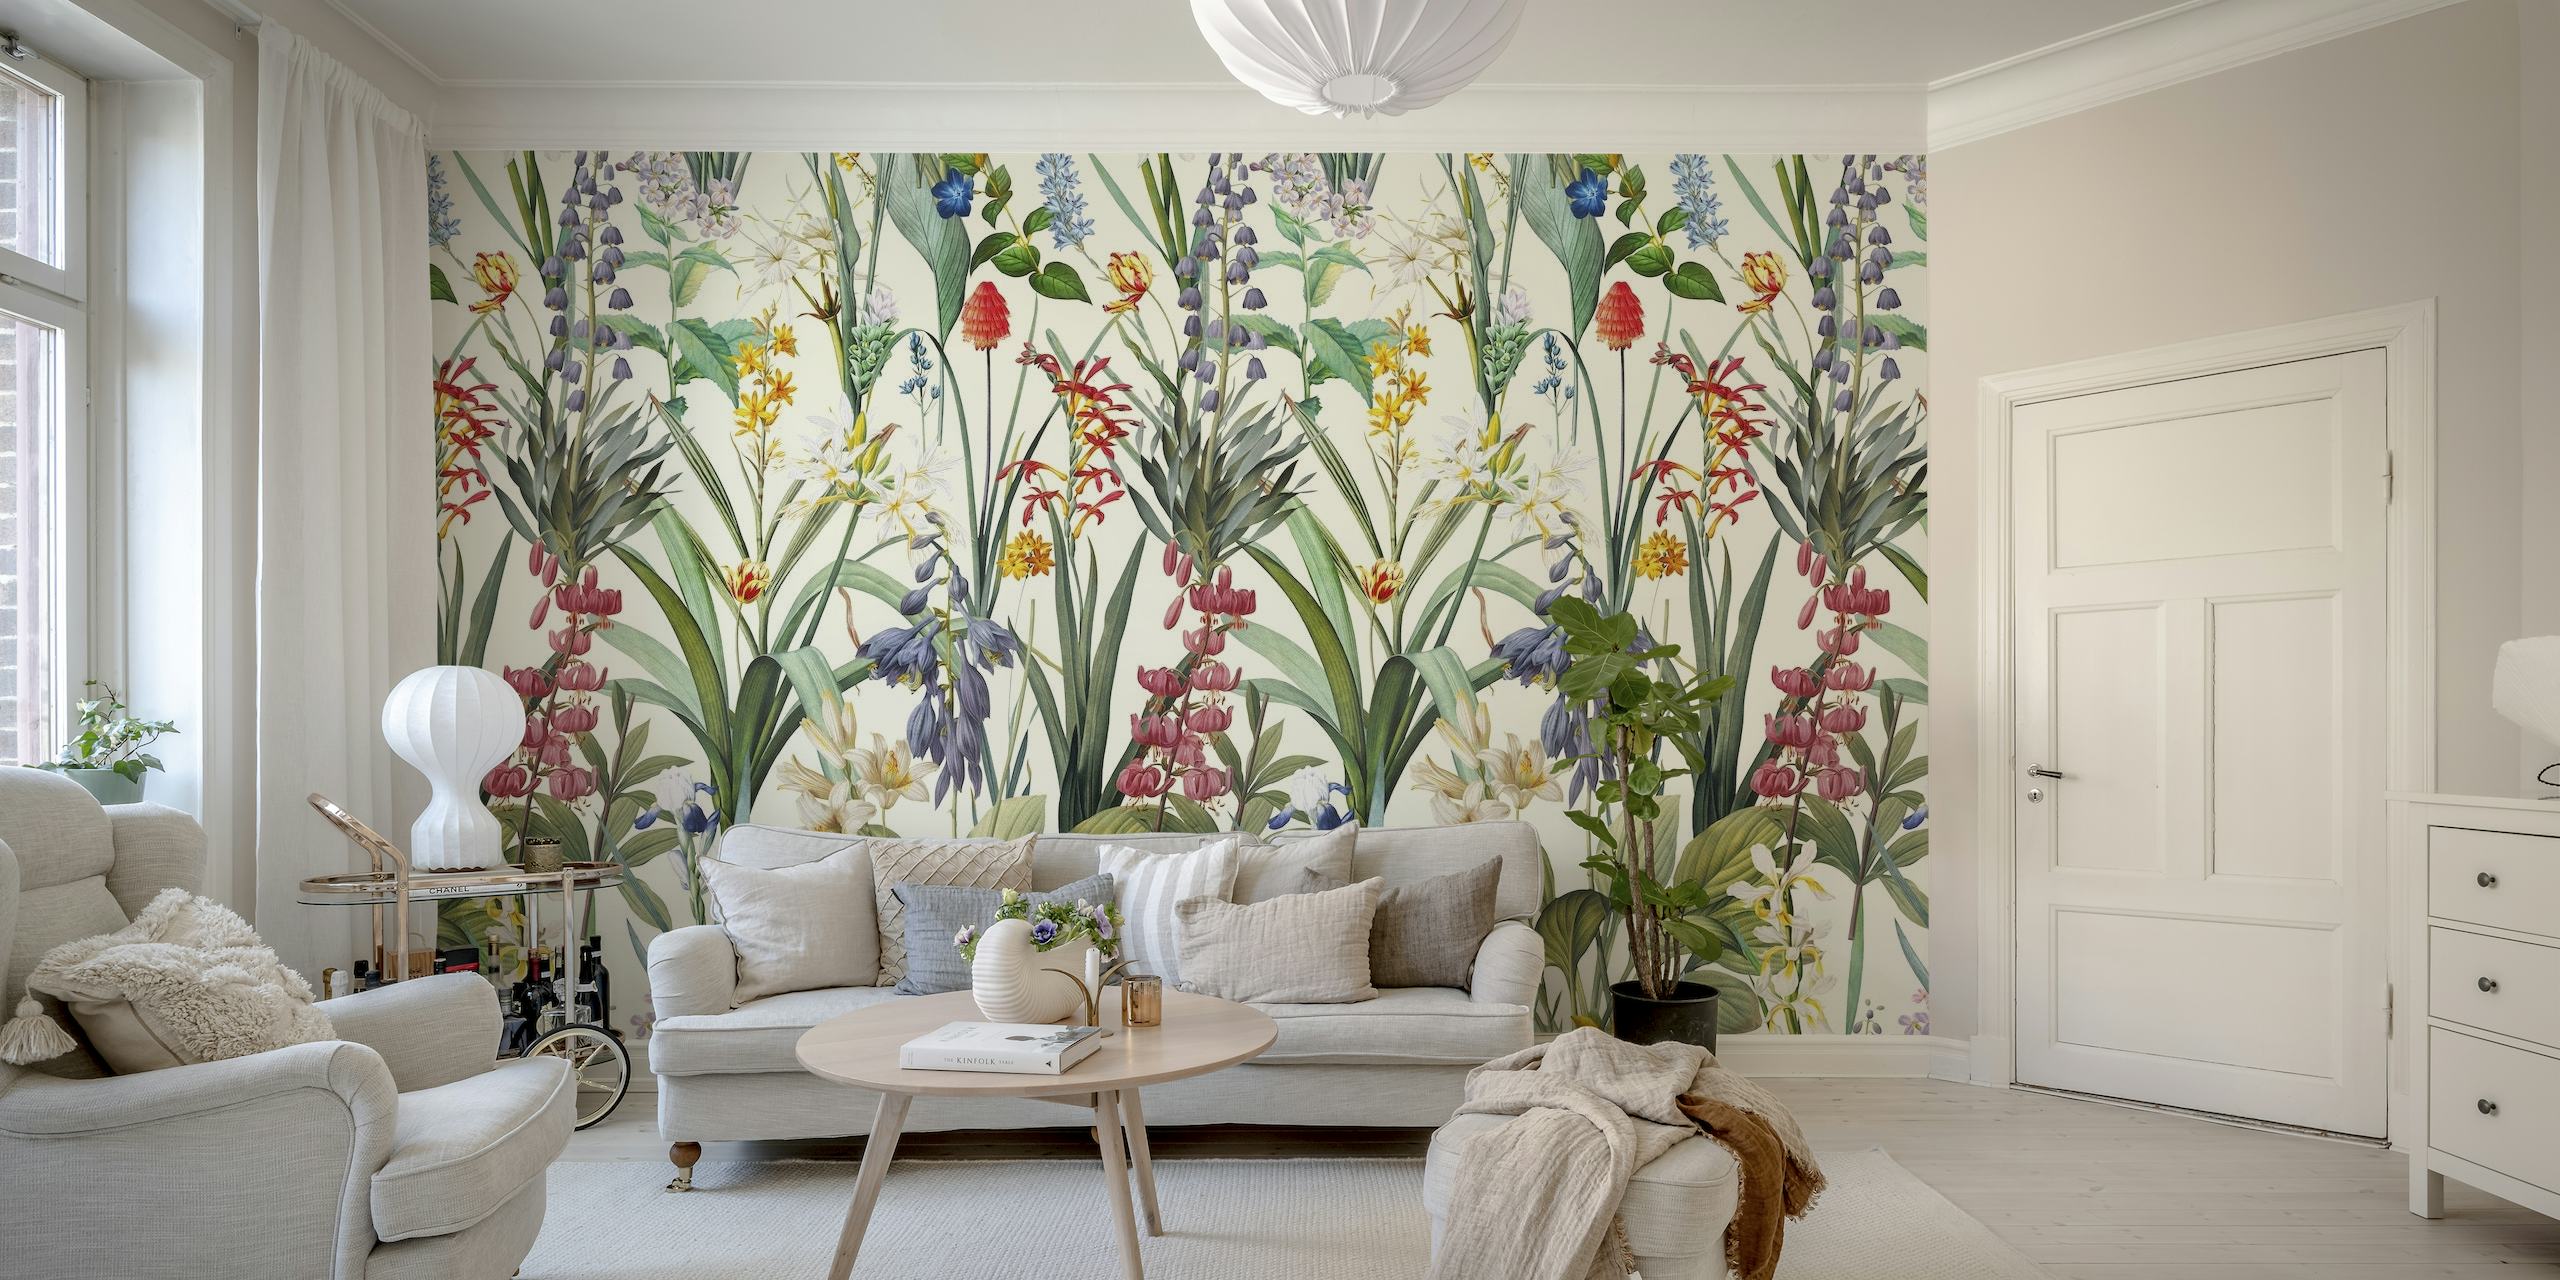 Vintage floral garden wall mural with an array of blooming flowers and greenery